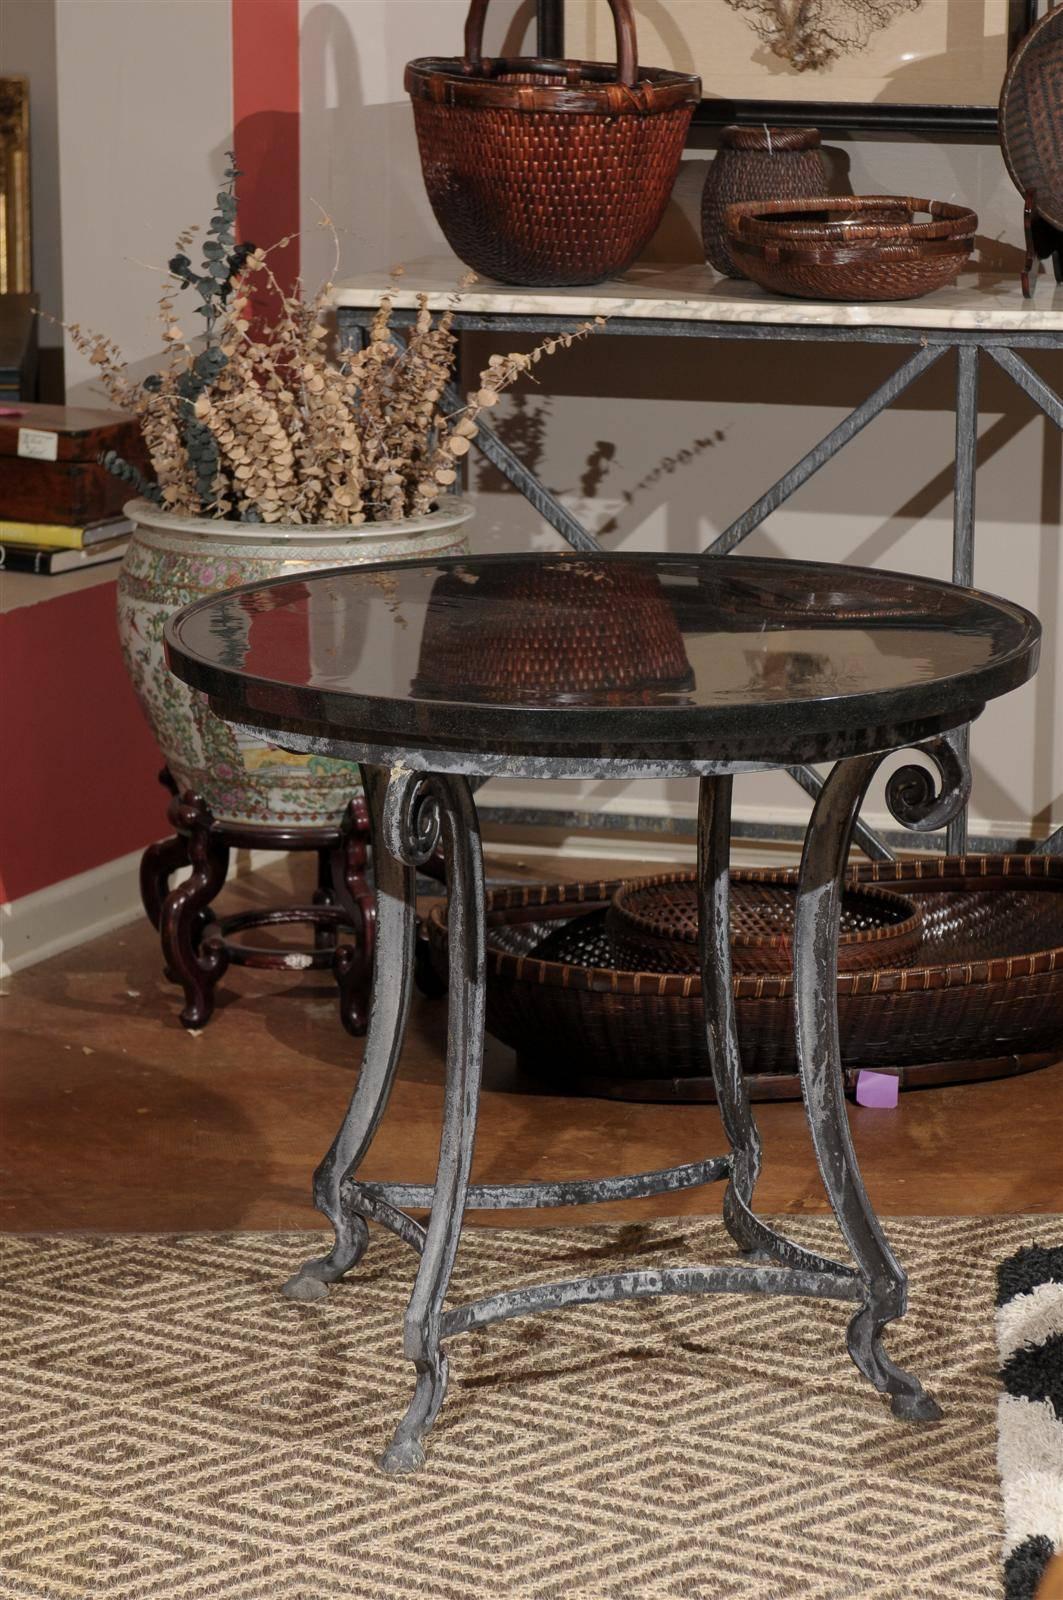 This is a lovely black granite round table has an indented edge to catch the wine spills! It sits on a beautiful forged iron base that has scrolling just below the iron edge and follows down to a great looking one toed hoof. 
The iron finish is the